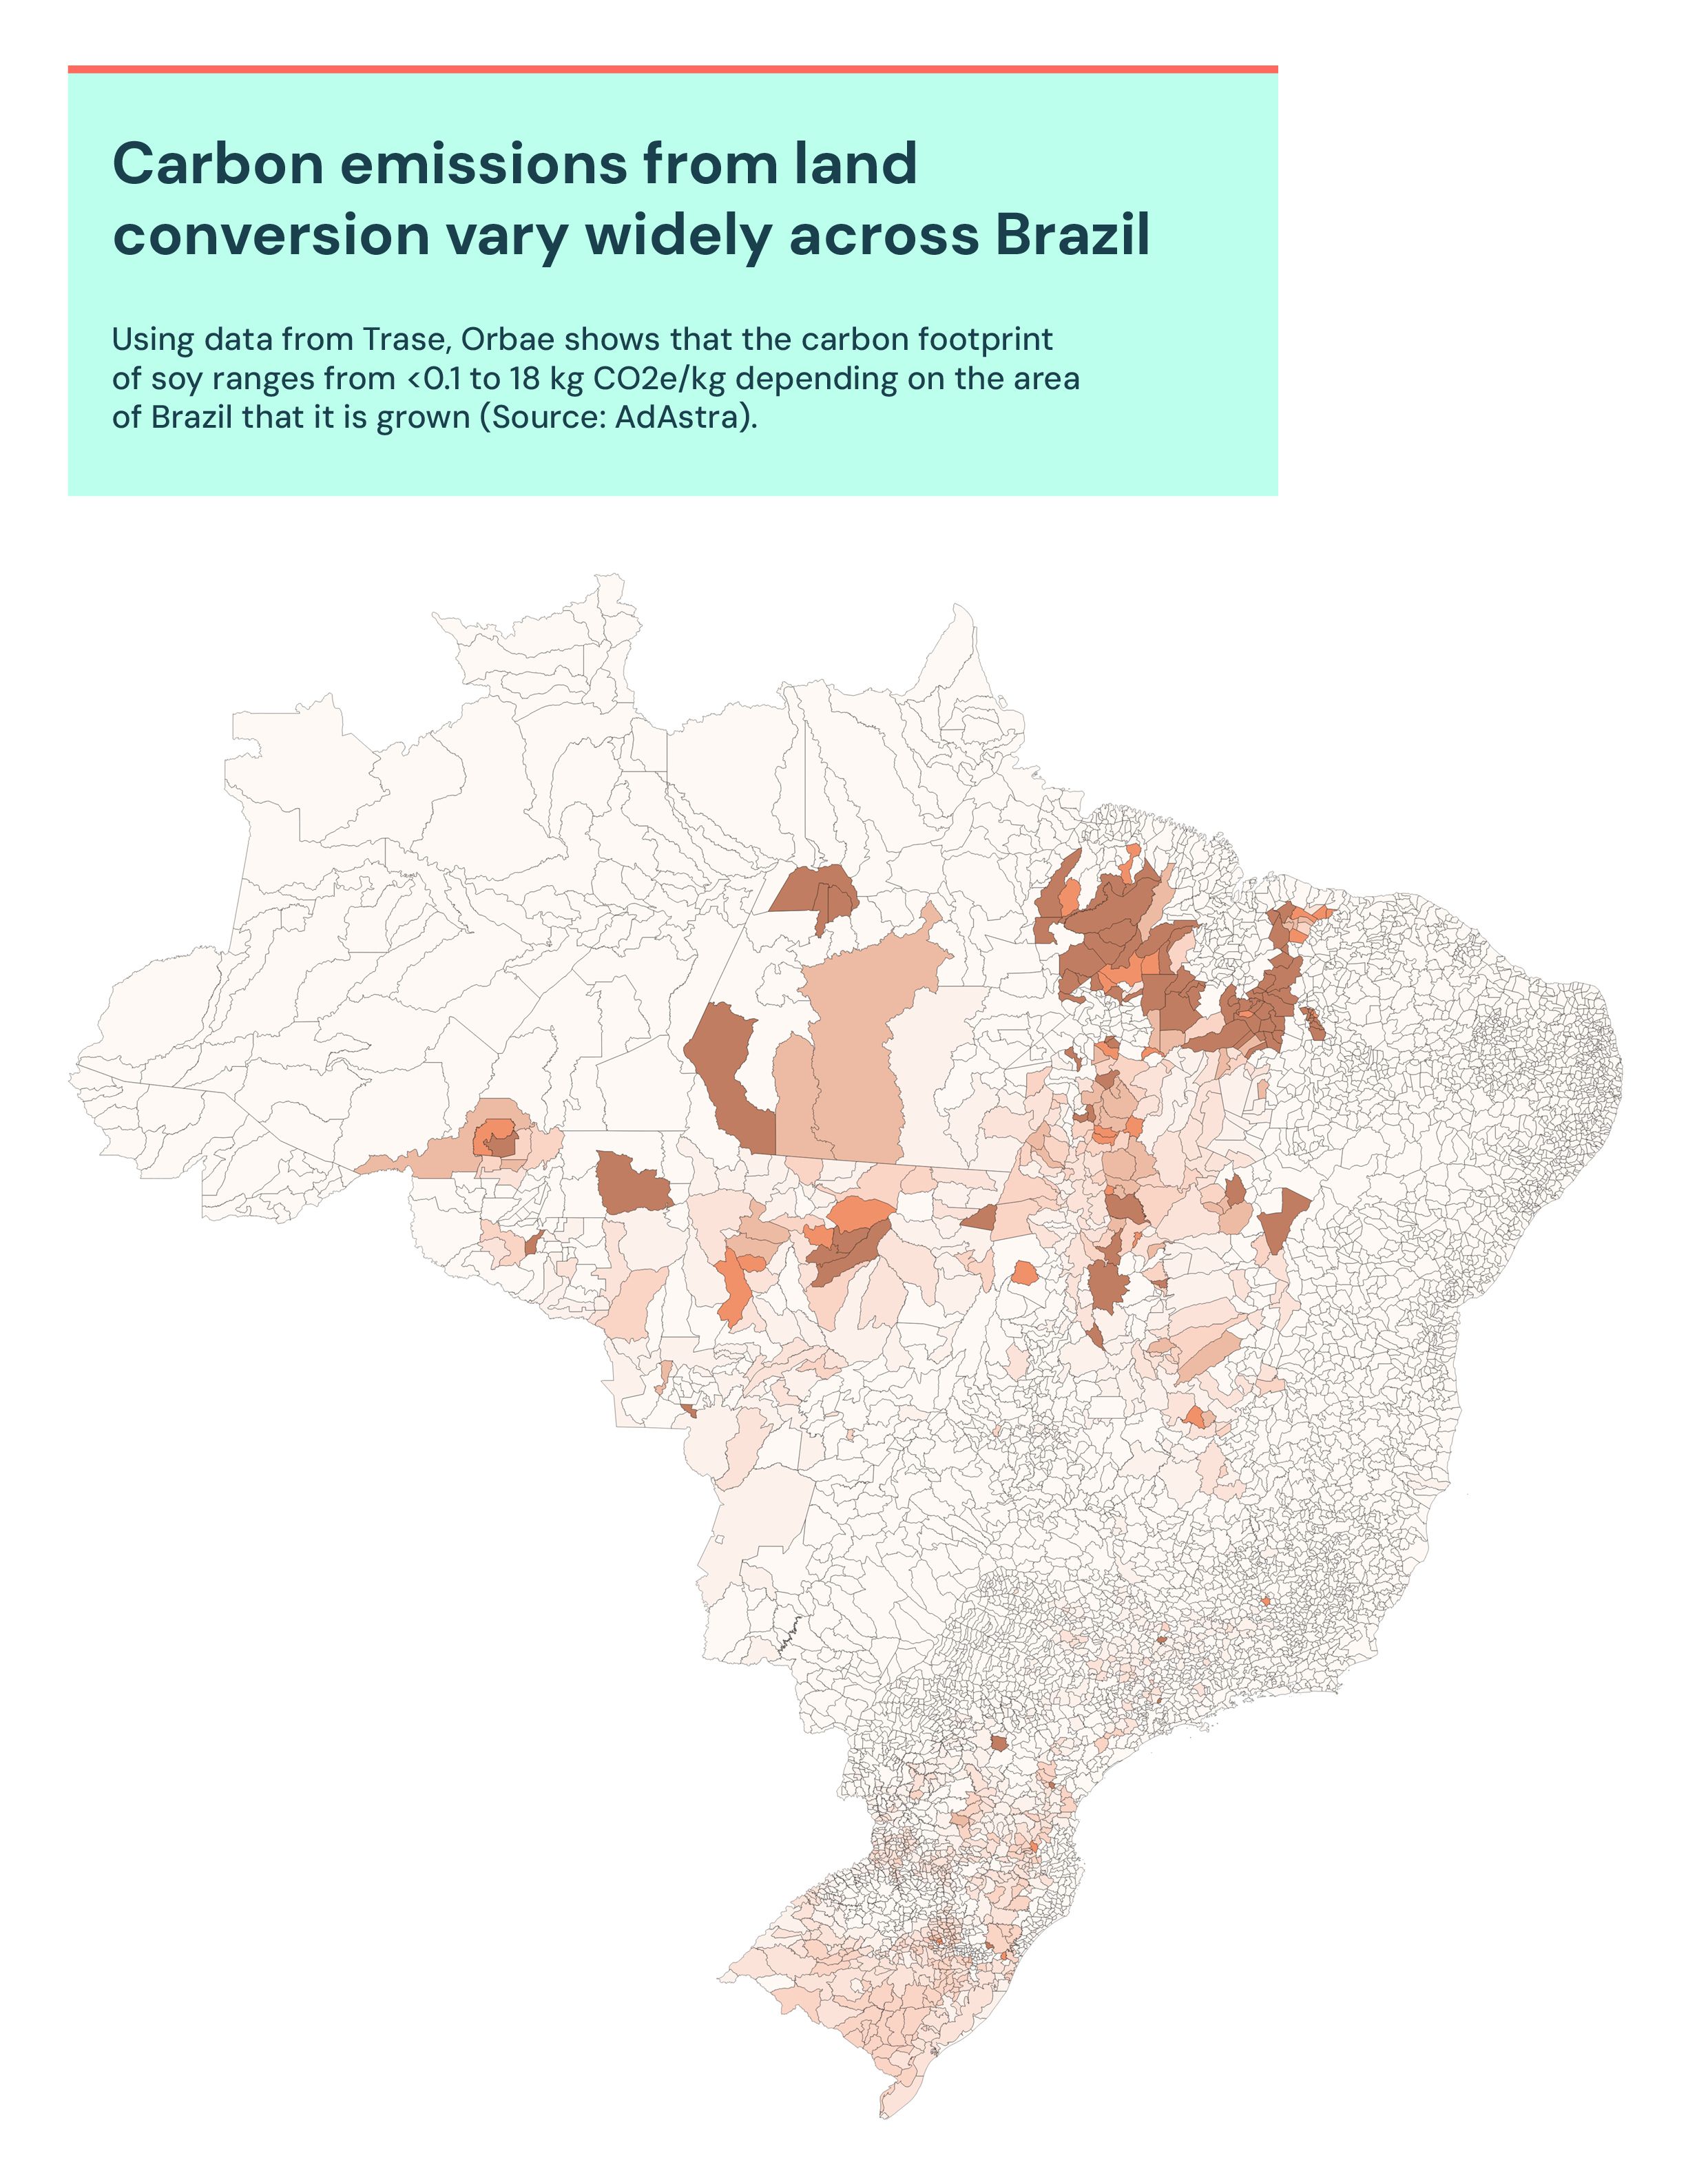 Carbon emissions from land conversion vary widely across Brazil. Using data from Trase, Orbae shows that the carbon footprint of soy ranges from <0.1 to 18 kg CO2e/kg depending on the area of Brazil that it is grown (Source: AdAstra).